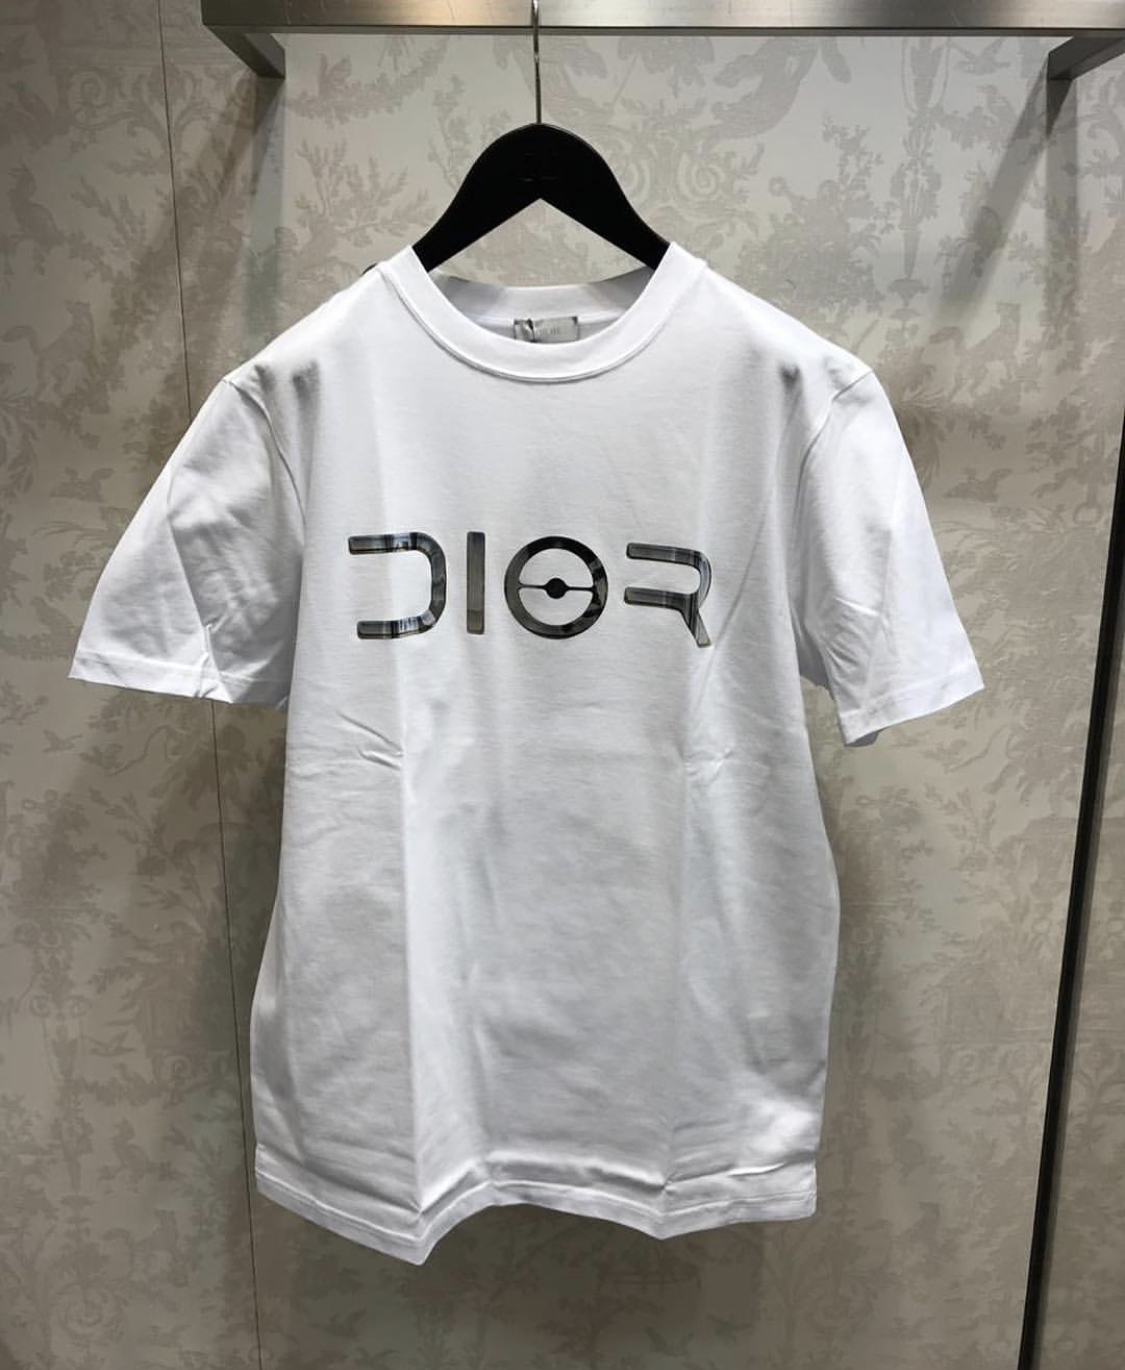 Buy > white and grey dior shirt > in stock